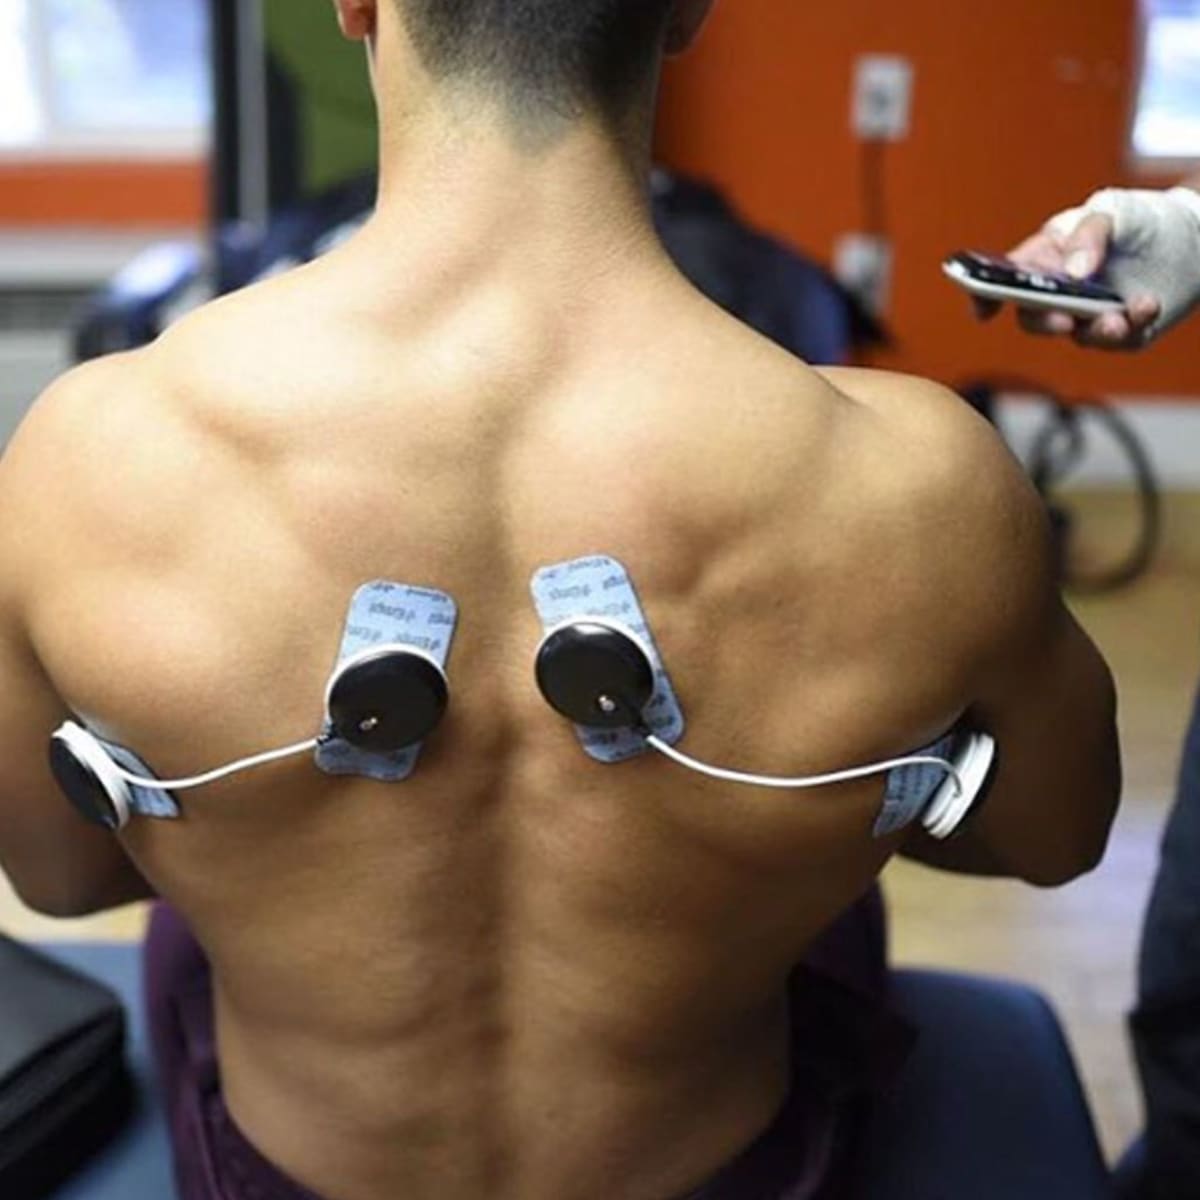 Study finds that sound plus electrical body stimulation has